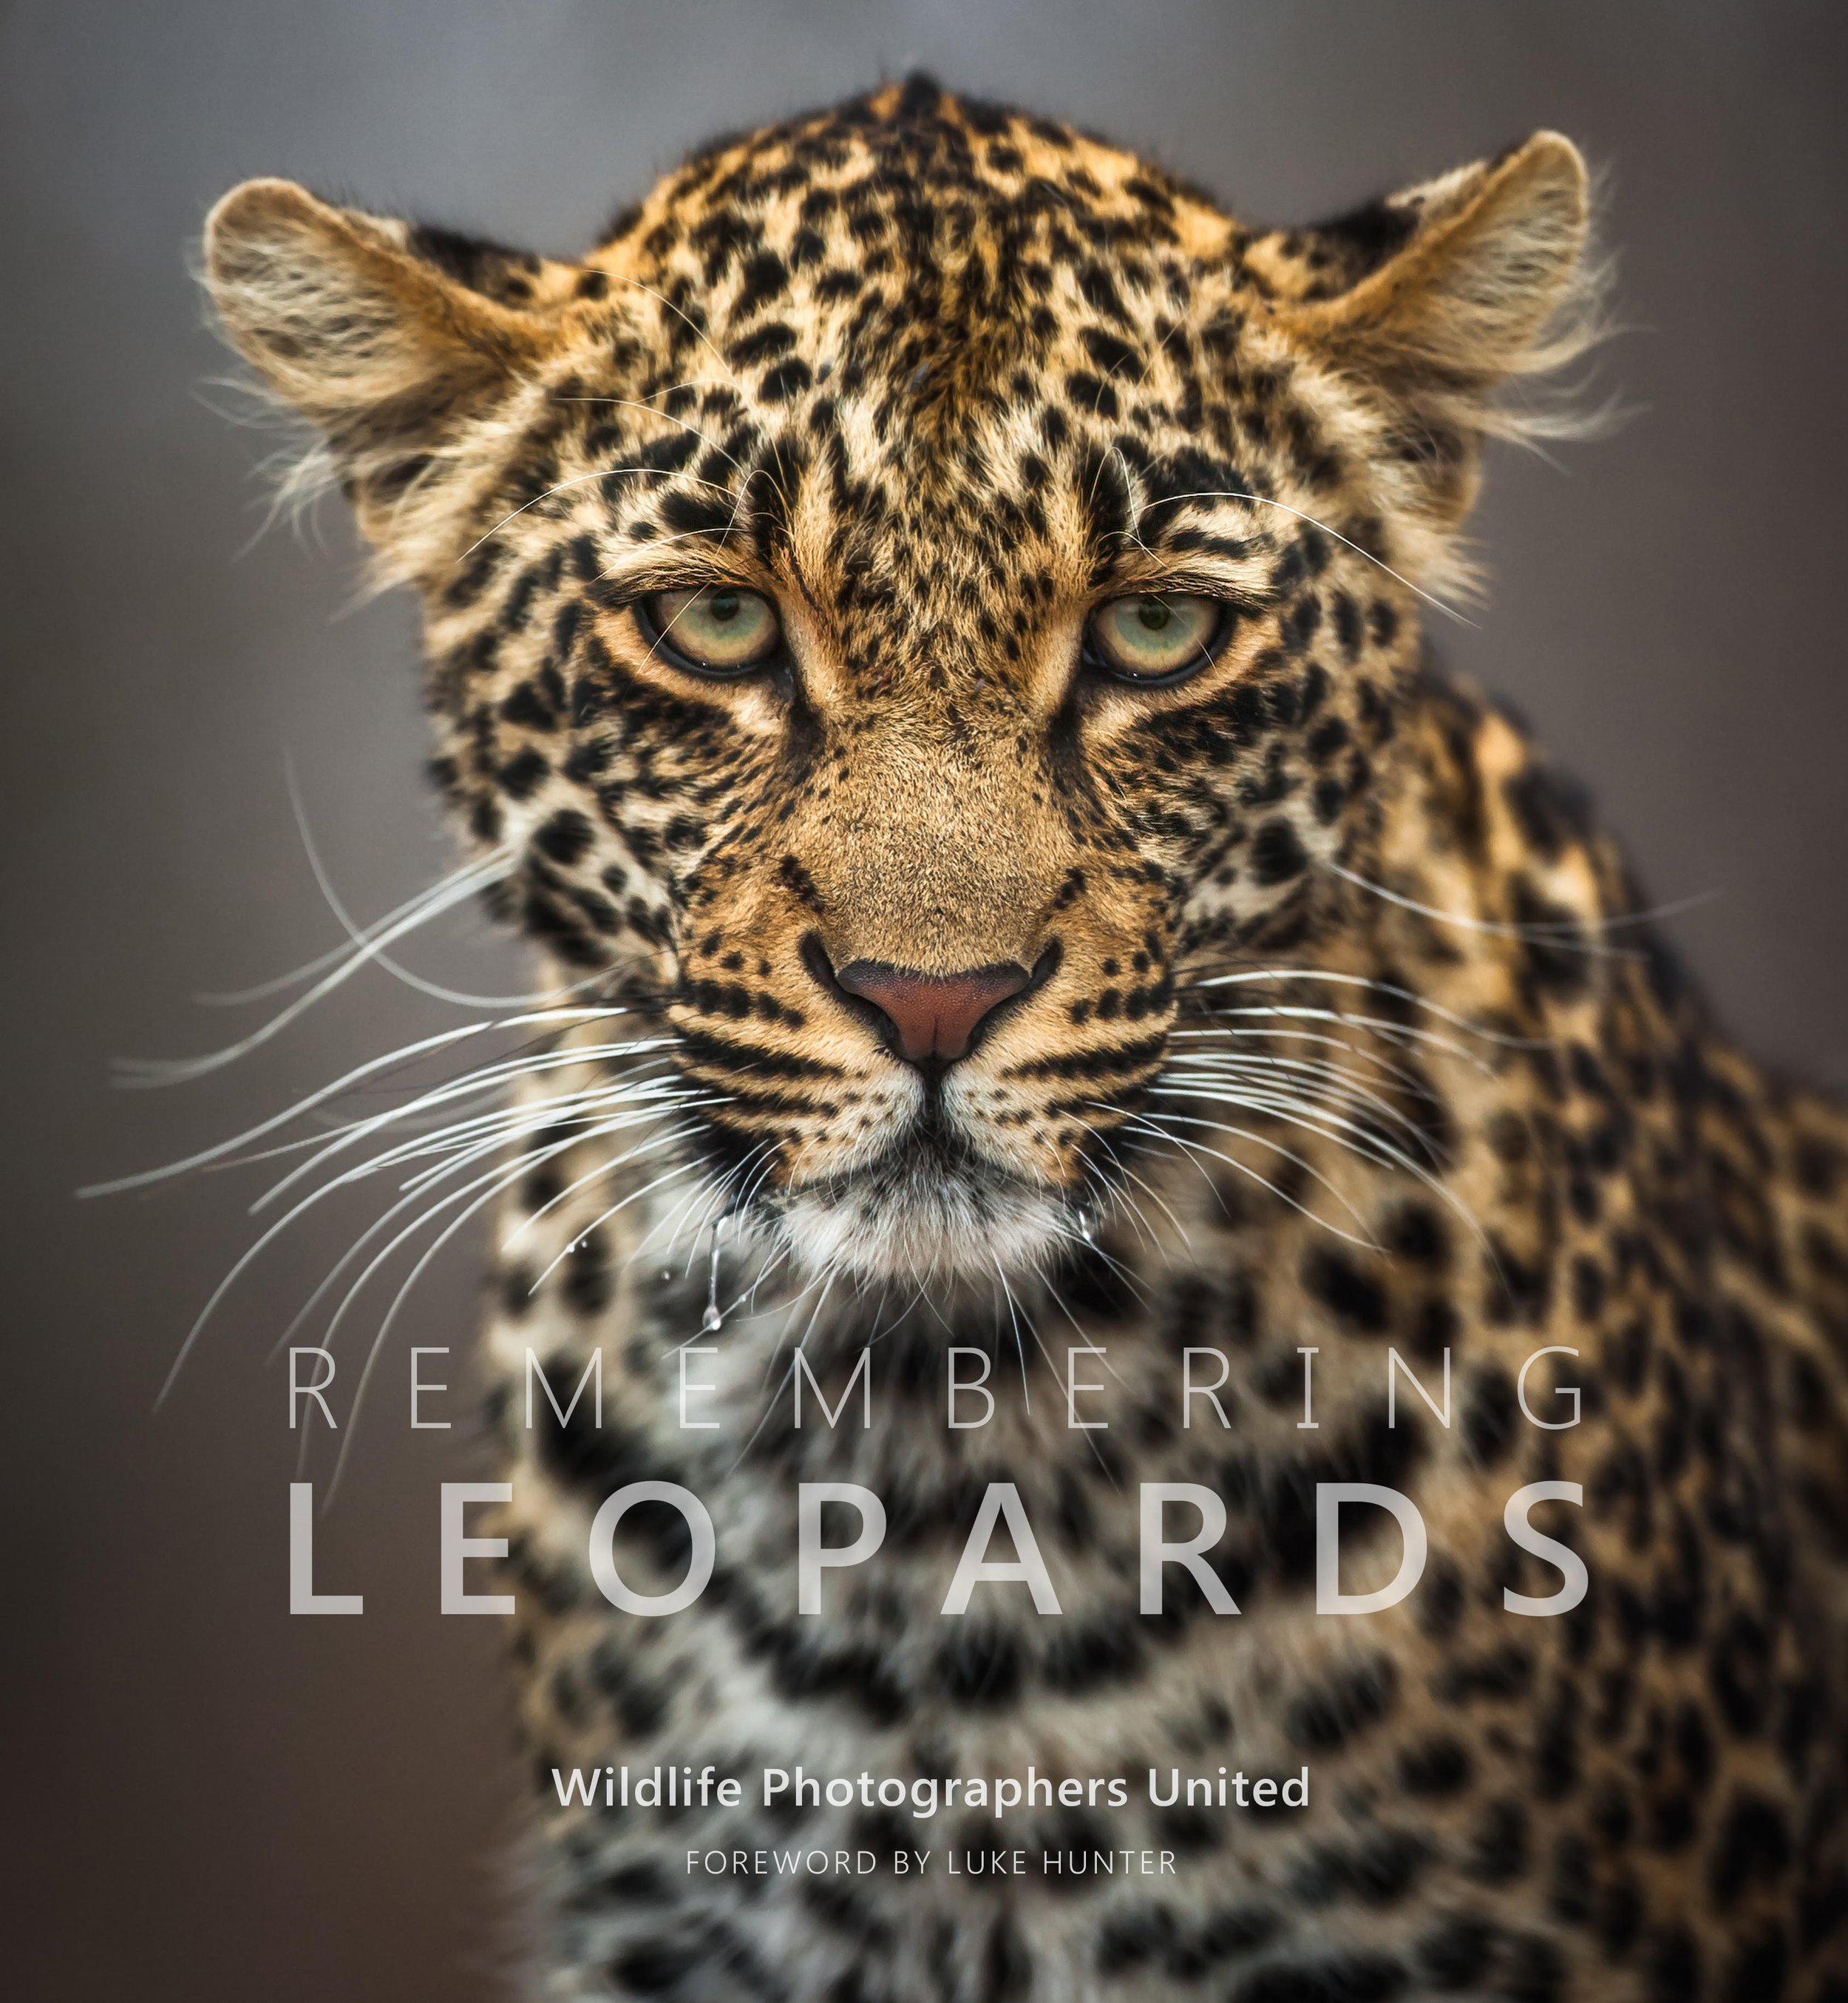 Remembering Leopards is the stunning eighth book in the Remembering Wildlife charity series. (Copy)